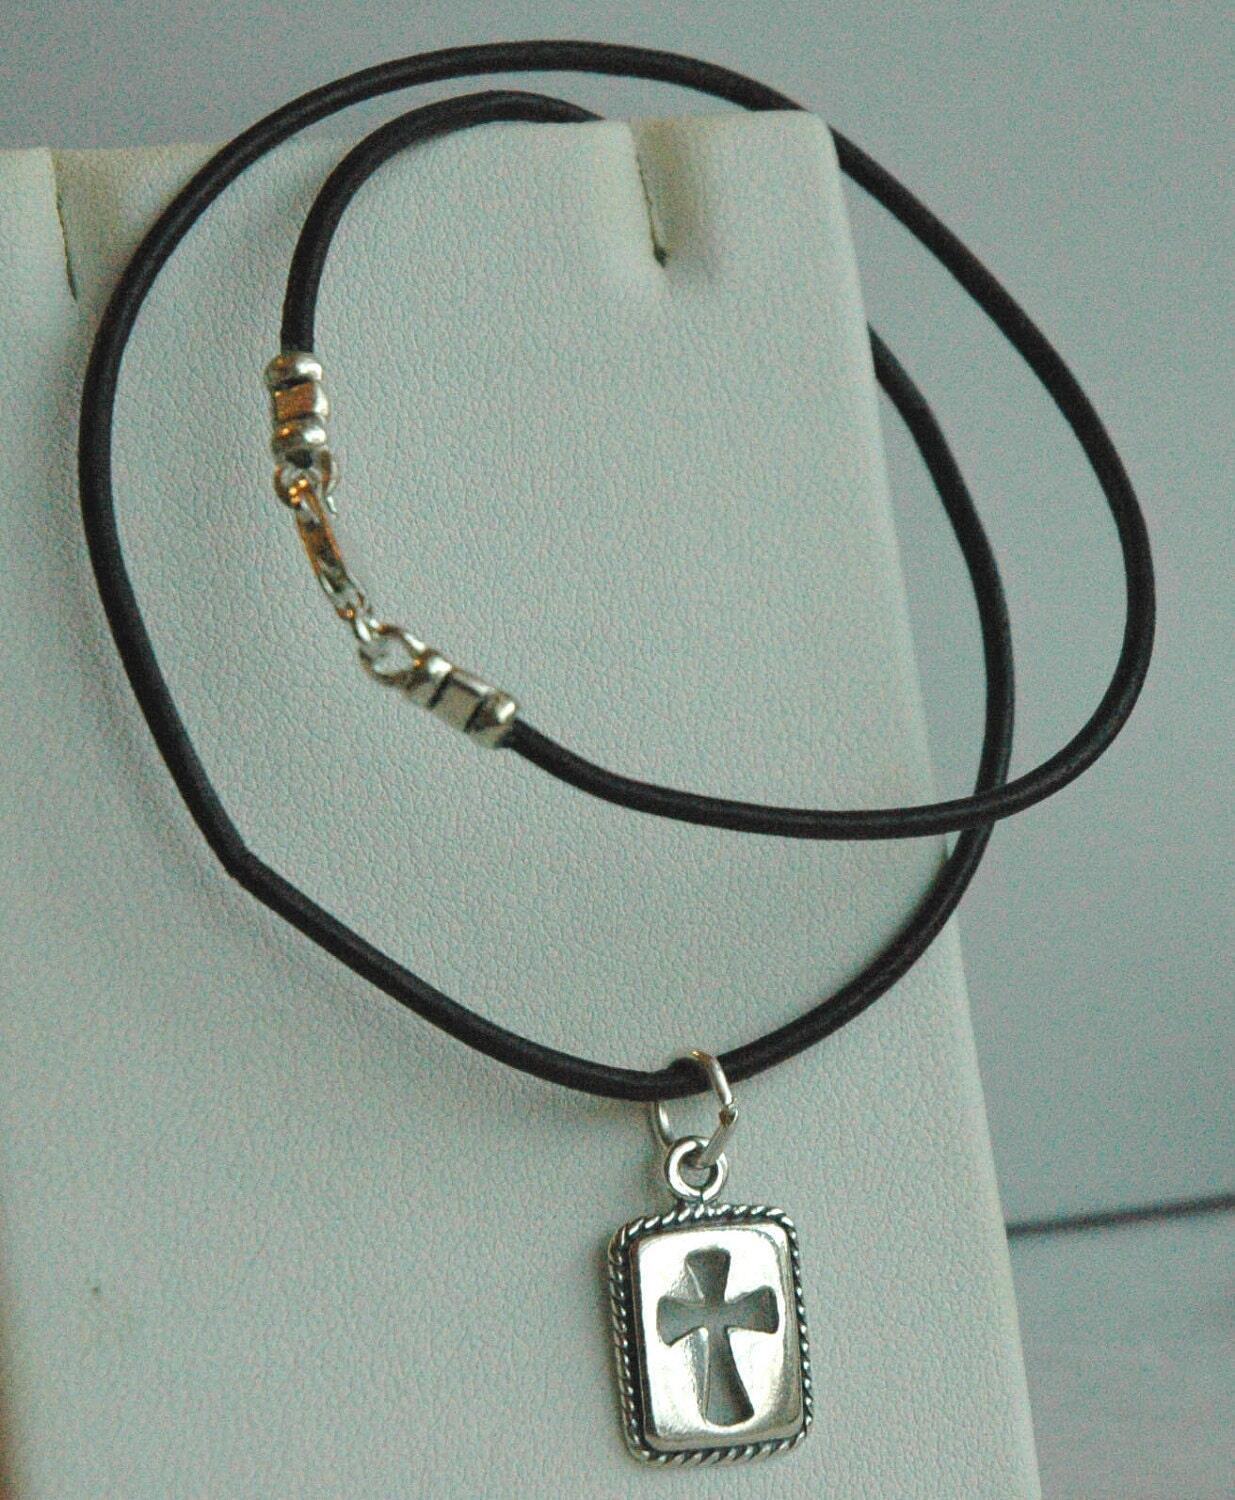 Boys 2Tone Crucifix Necklace - Sterling Silver Pendant on 20